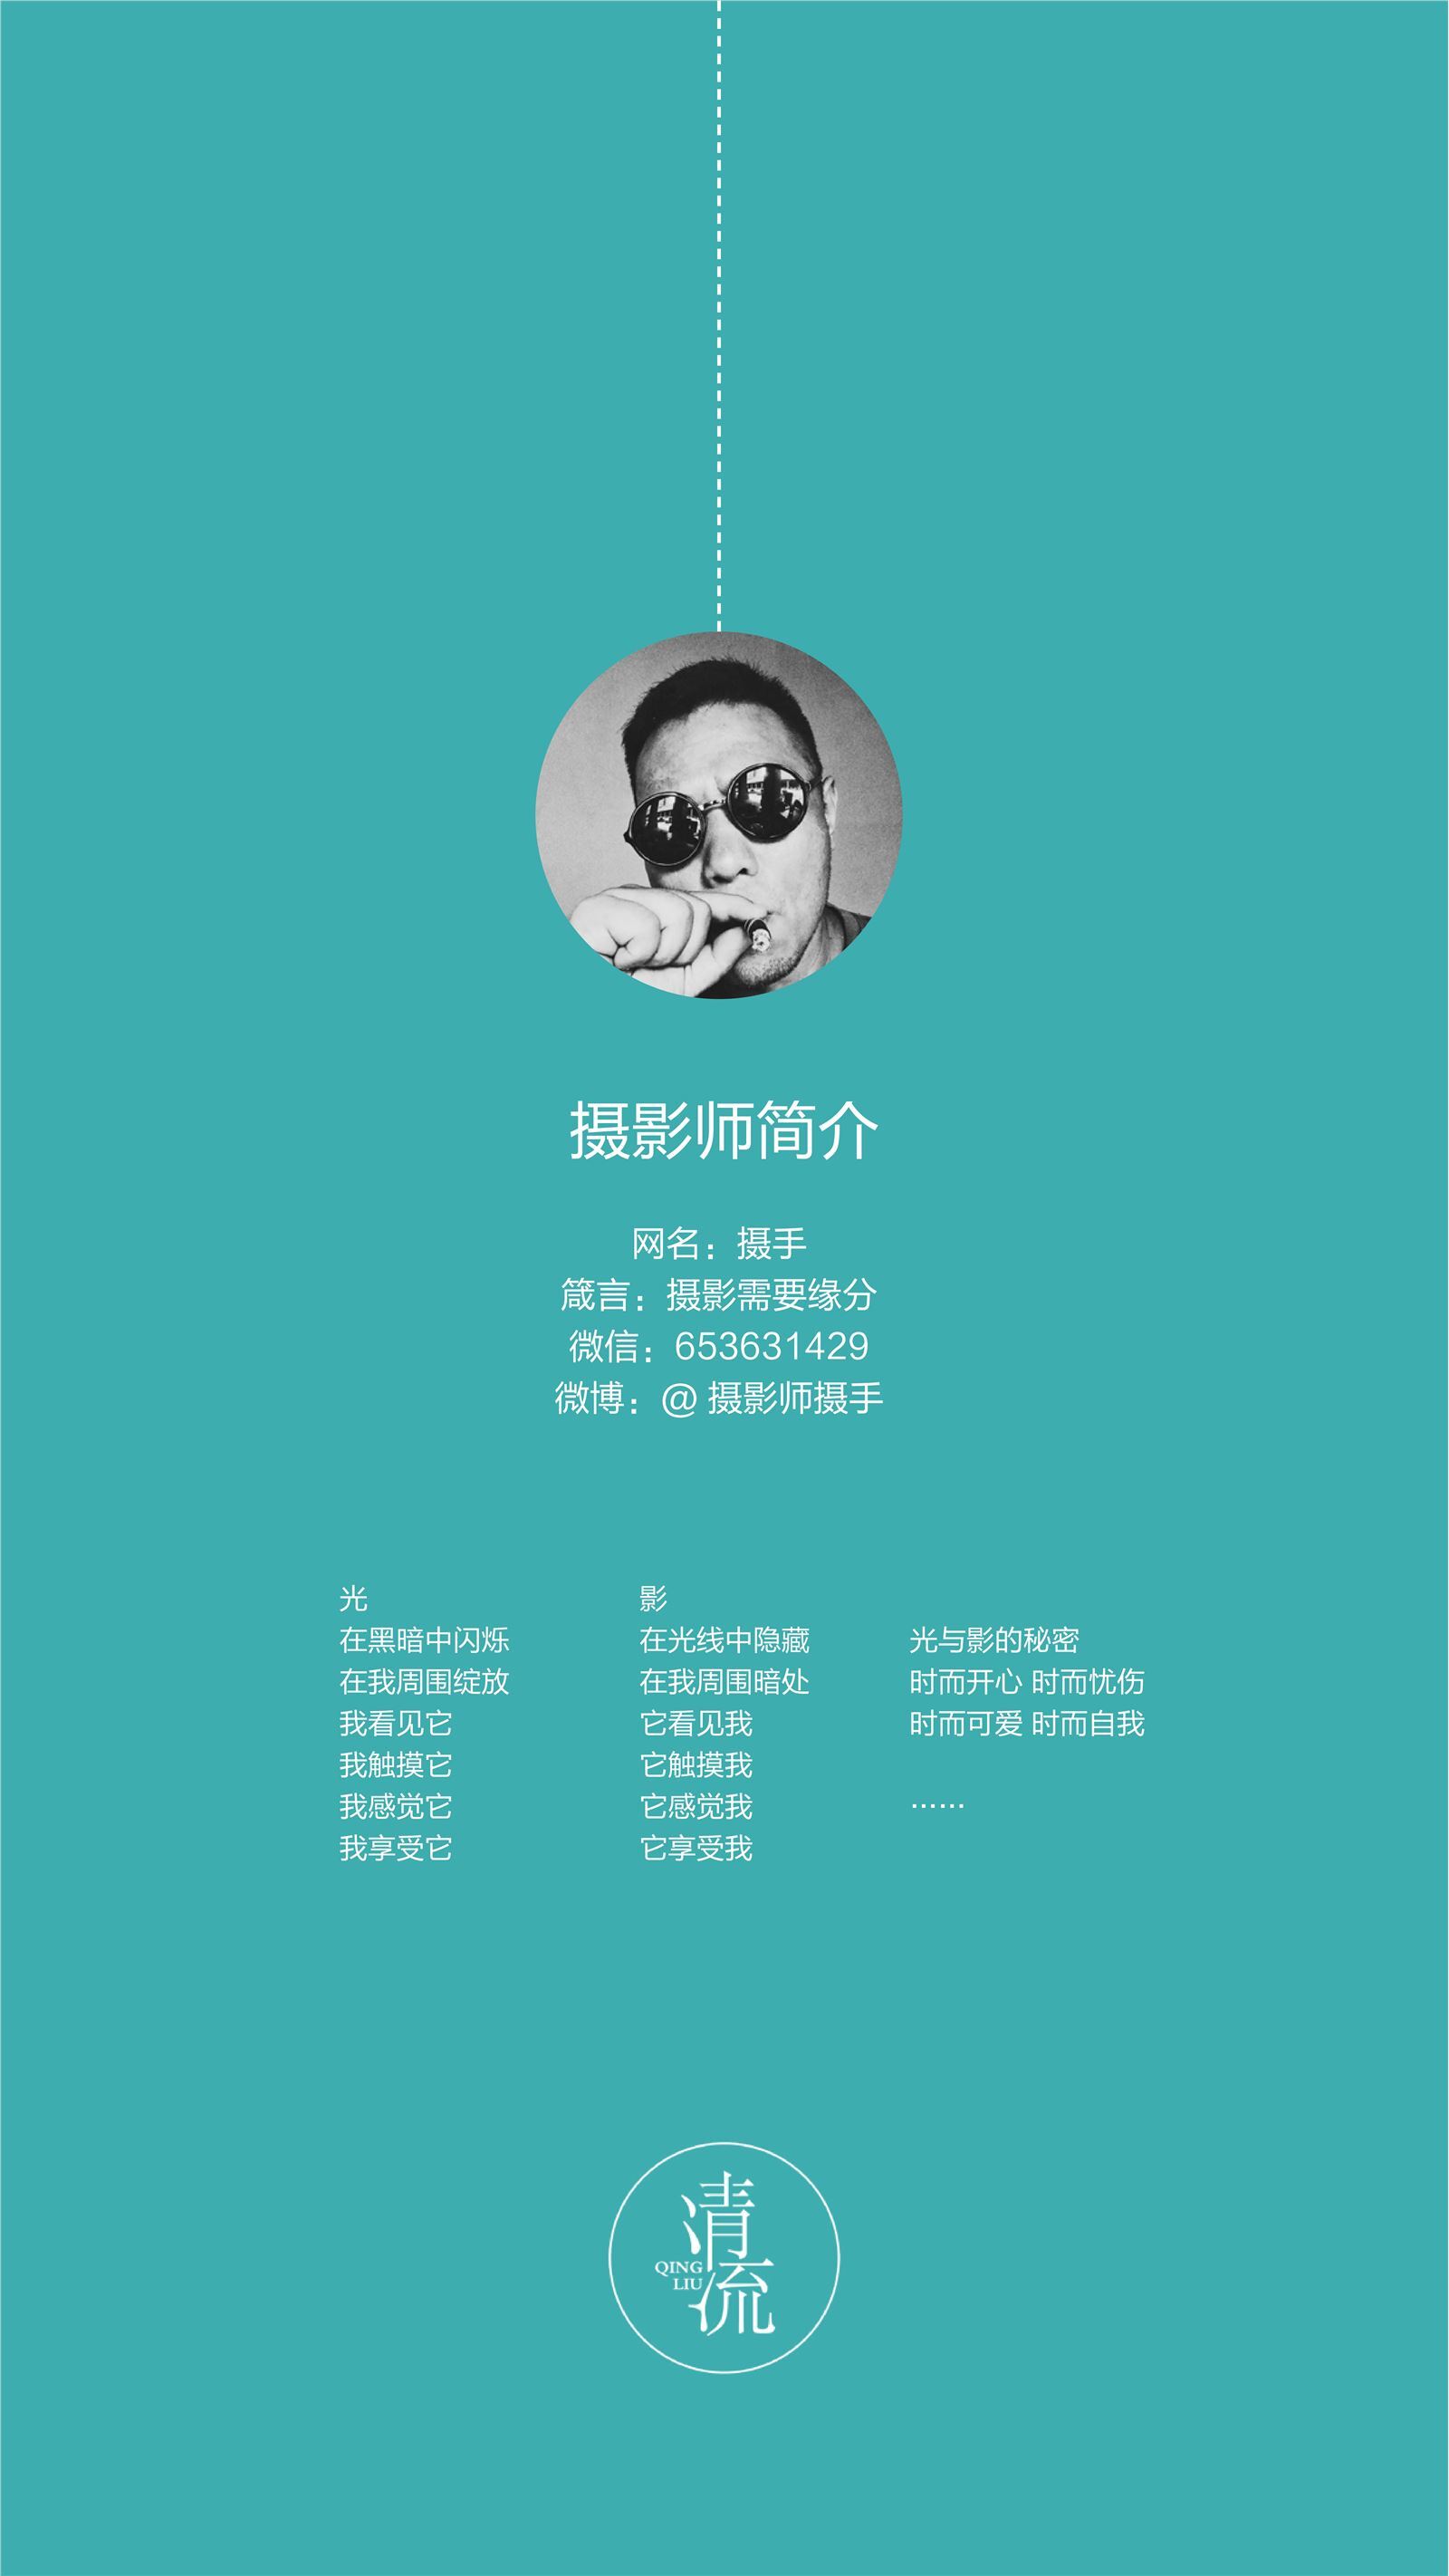 The first issue of Qingliu magazine on August 15, 2017